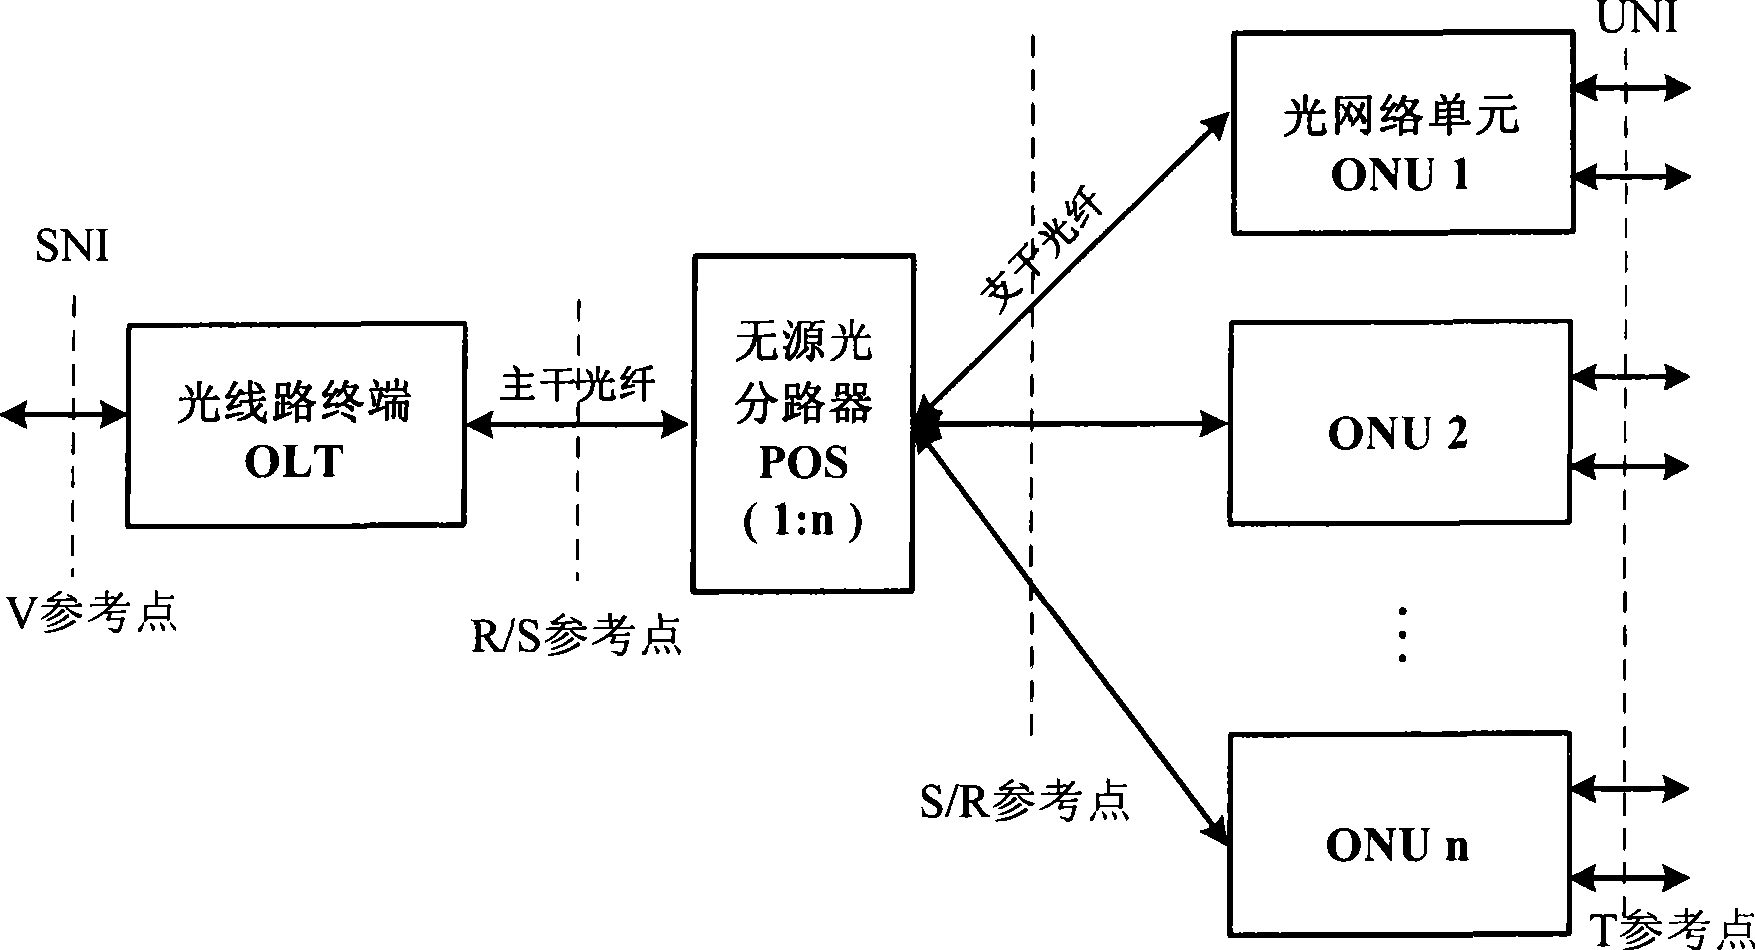 Method for mutual protection of adjacent ONU